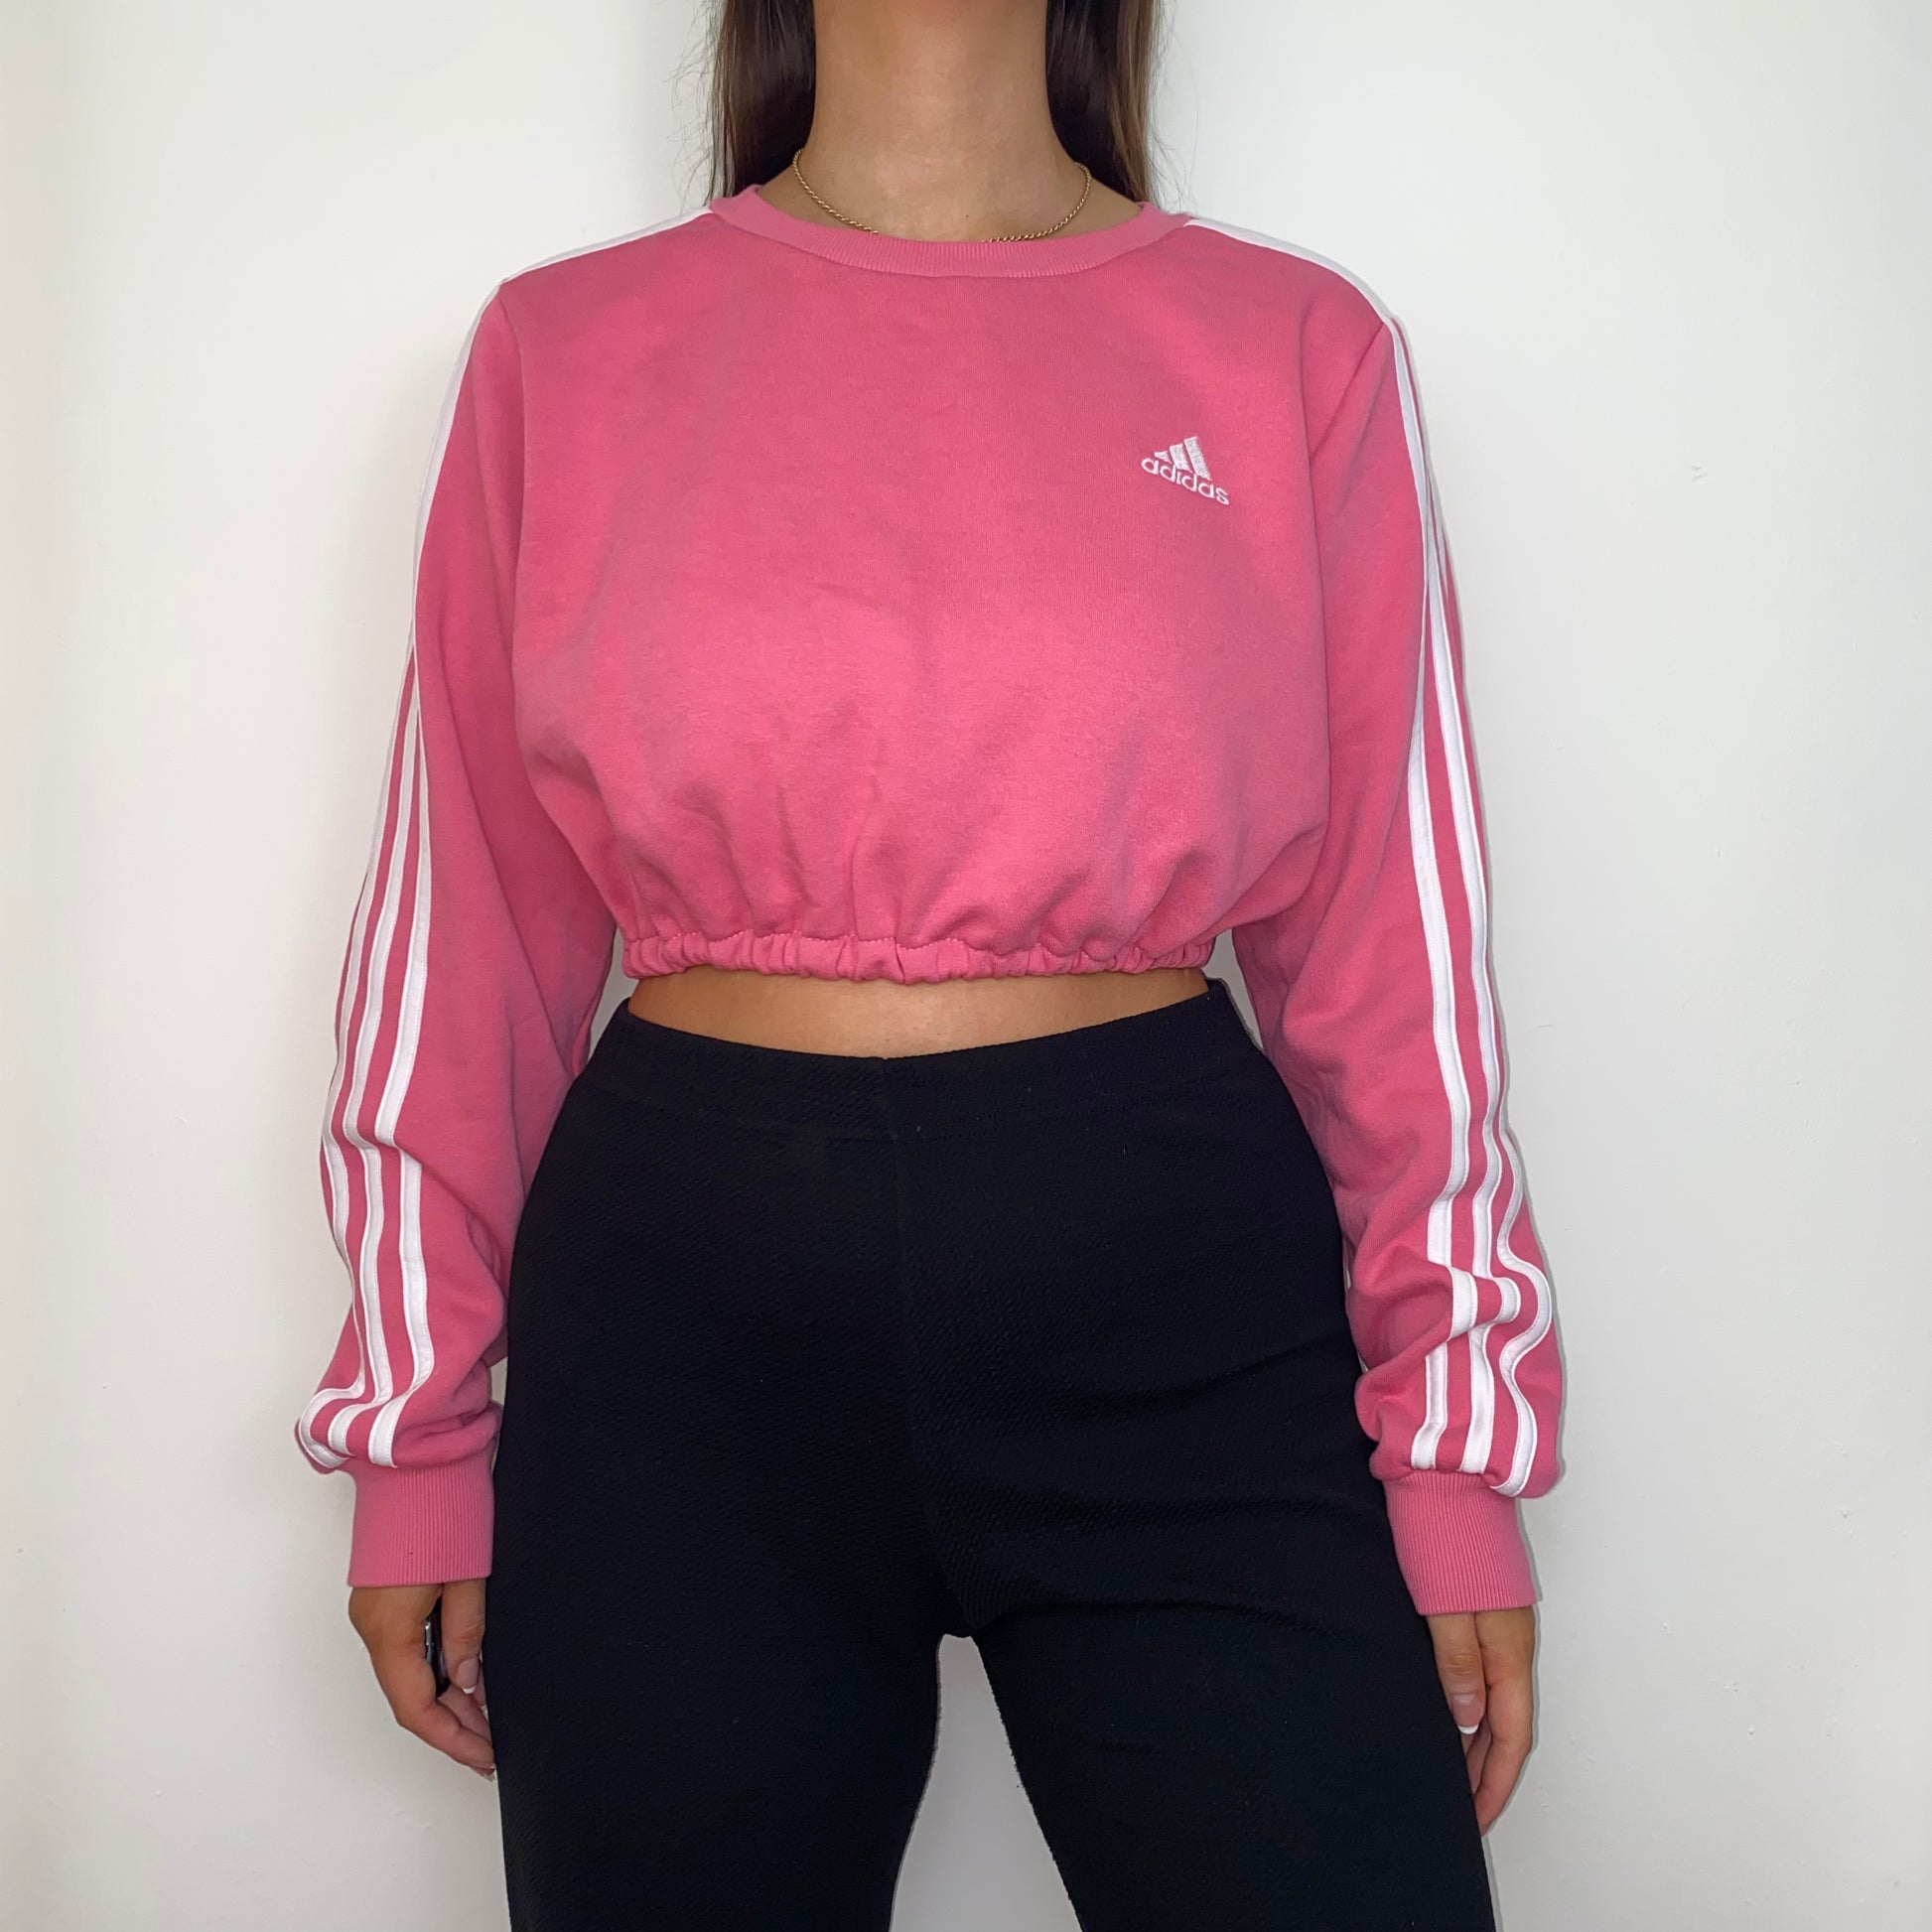 pink adidas cropped sweatshirt with white adidas logo shown on a model wearing black trousers